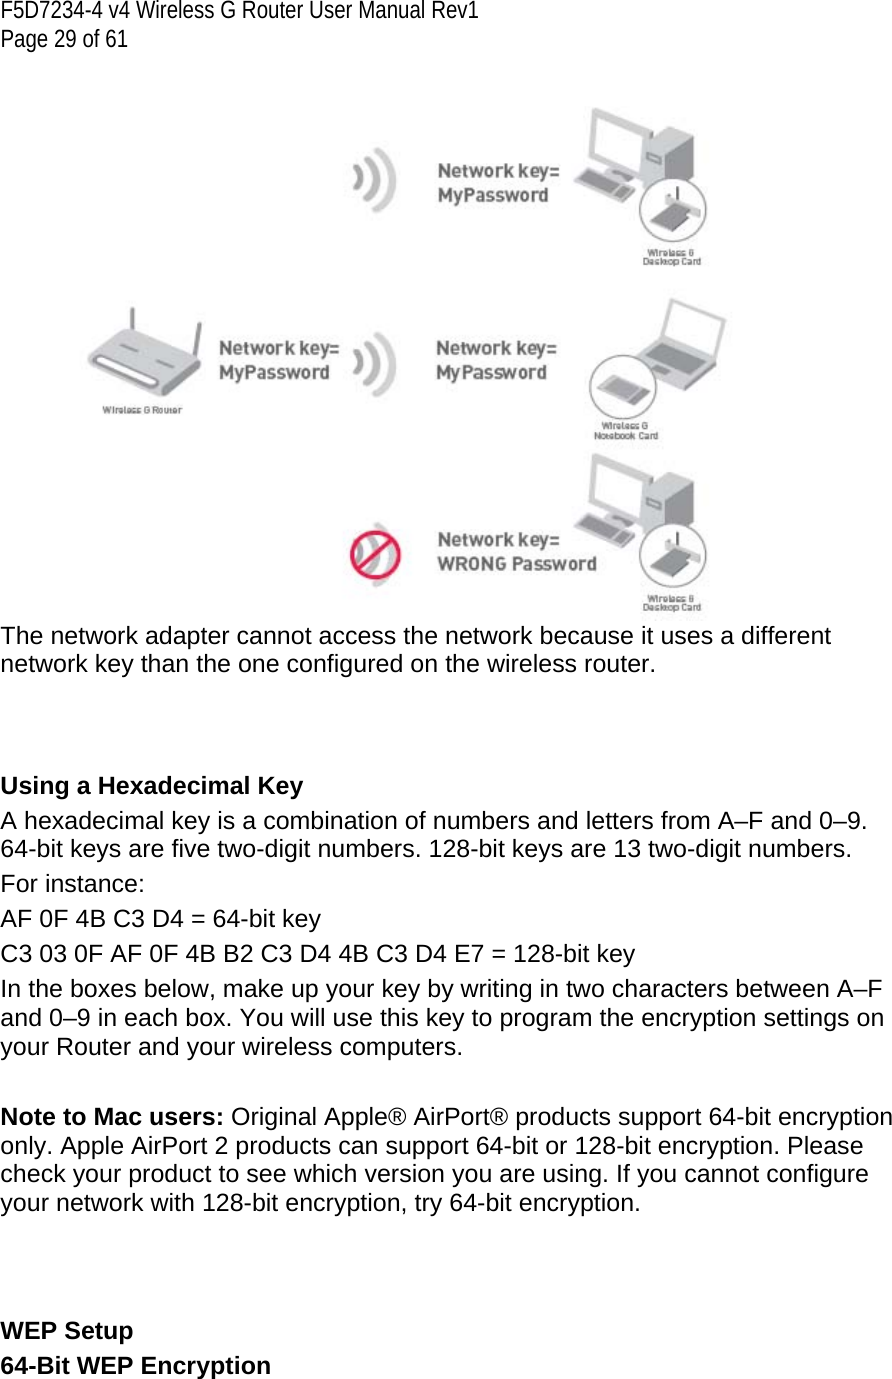 F5D7234-4 v4 Wireless G Router User Manual Rev1  Page 29 of 61    The network adapter cannot access the network because it uses a different network key than the one configured on the wireless router.    Using a Hexadecimal Key A hexadecimal key is a combination of numbers and letters from A–F and 0–9. 64-bit keys are five two-digit numbers. 128-bit keys are 13 two-digit numbers. For instance: AF 0F 4B C3 D4 = 64-bit key C3 03 0F AF 0F 4B B2 C3 D4 4B C3 D4 E7 = 128-bit key In the boxes below, make up your key by writing in two characters between A–F and 0–9 in each box. You will use this key to program the encryption settings on your Router and your wireless computers.   Note to Mac users: Original Apple® AirPort® products support 64-bit encryption only. Apple AirPort 2 products can support 64-bit or 128-bit encryption. Please check your product to see which version you are using. If you cannot configure your network with 128-bit encryption, try 64-bit encryption.    WEP Setup 64-Bit WEP Encryption  